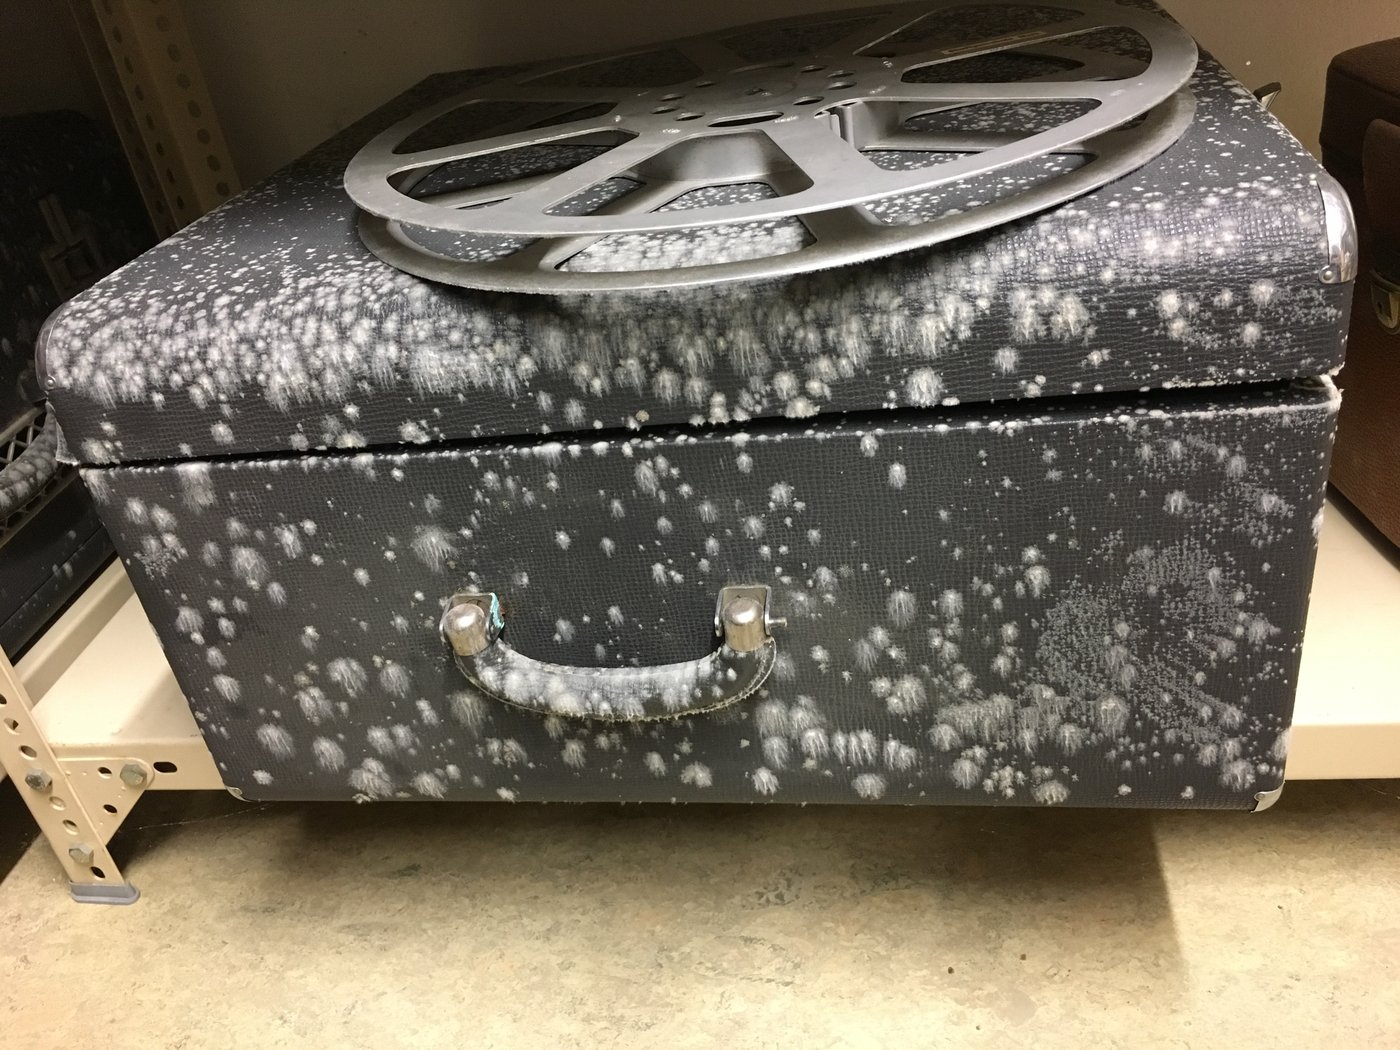 A black suitcase with an empty roll of film on top. The suitcase is covered with white mould colonies.